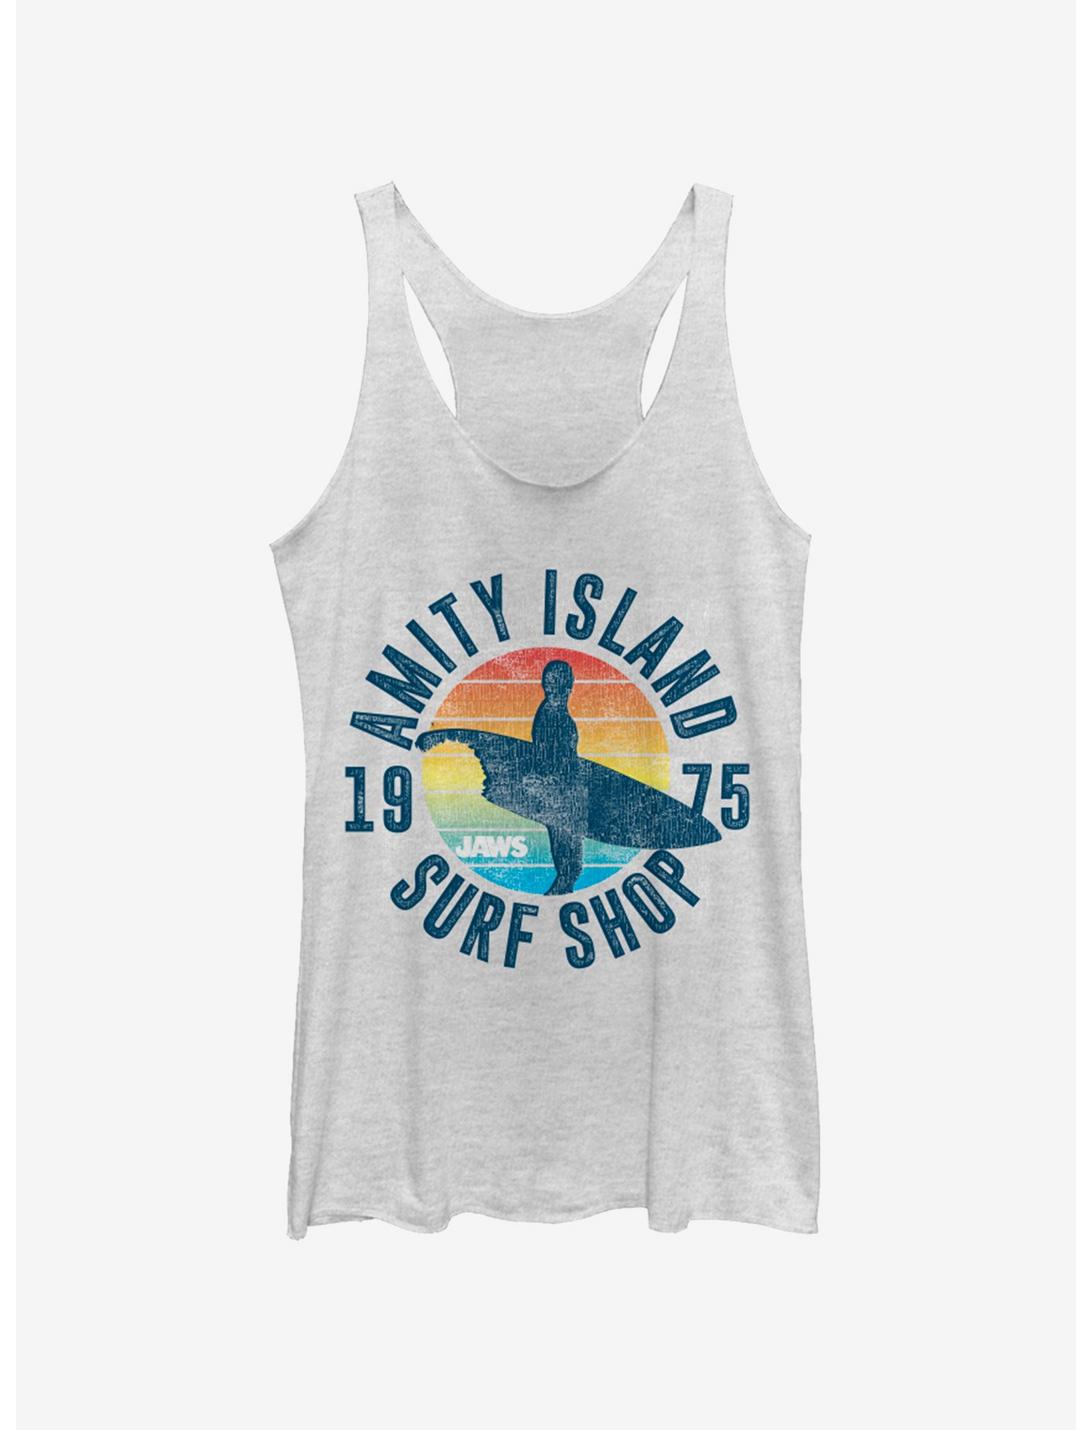 Jaws Amity Surf Shop Womens Tank Top, WHITE HTR, hi-res